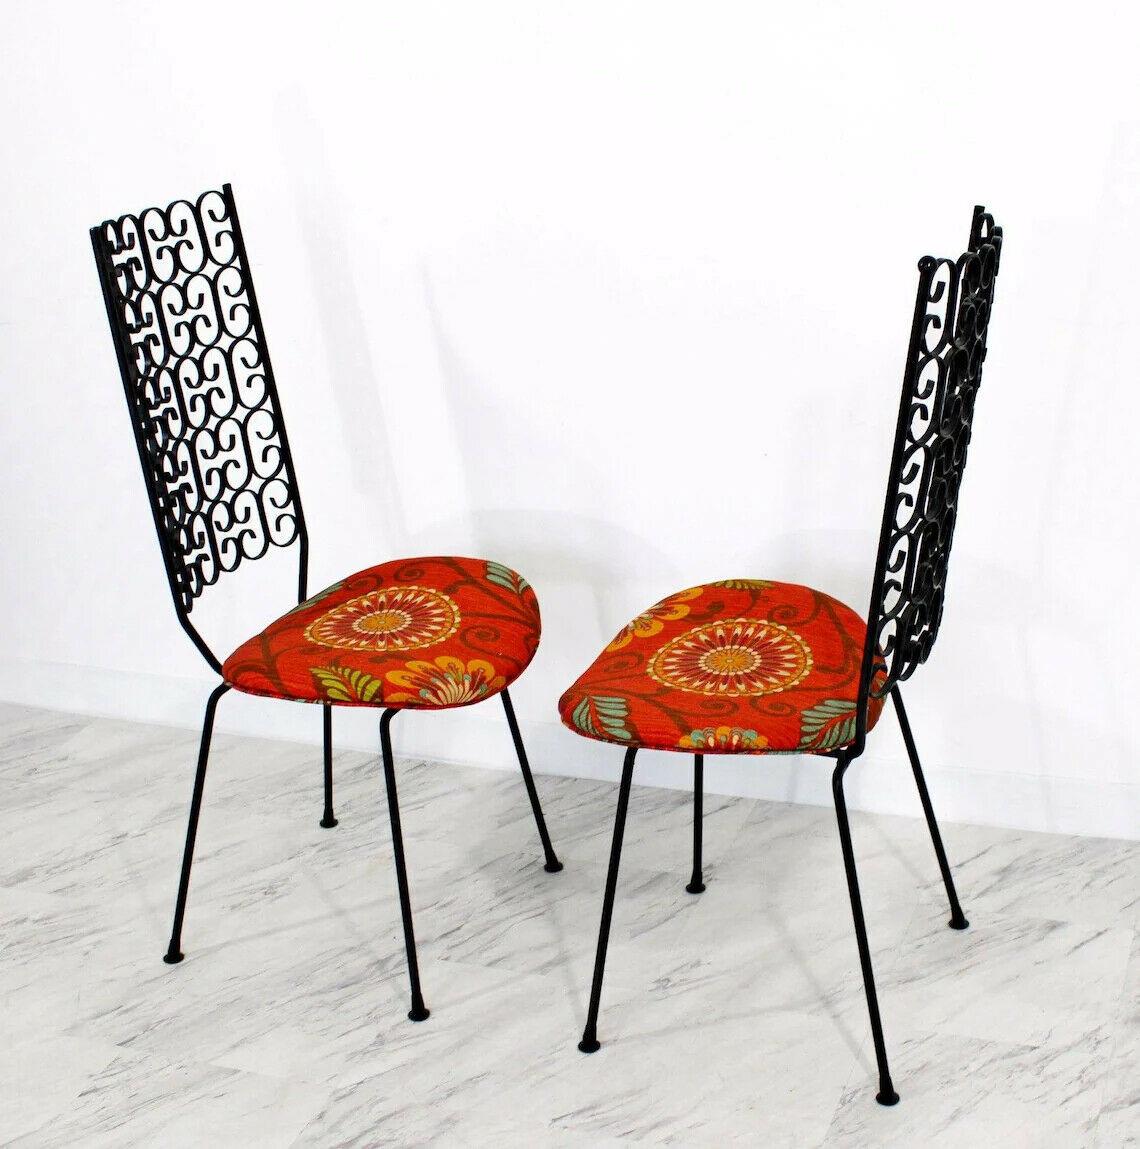 For your consideration is a super sexy bistro/patio set by Arthur Umanoff. Set includes a wrought iron table, with a glass top, and four matching chairs, with funky, orange fabric. In excellent condition. The dimensions of the table are 42